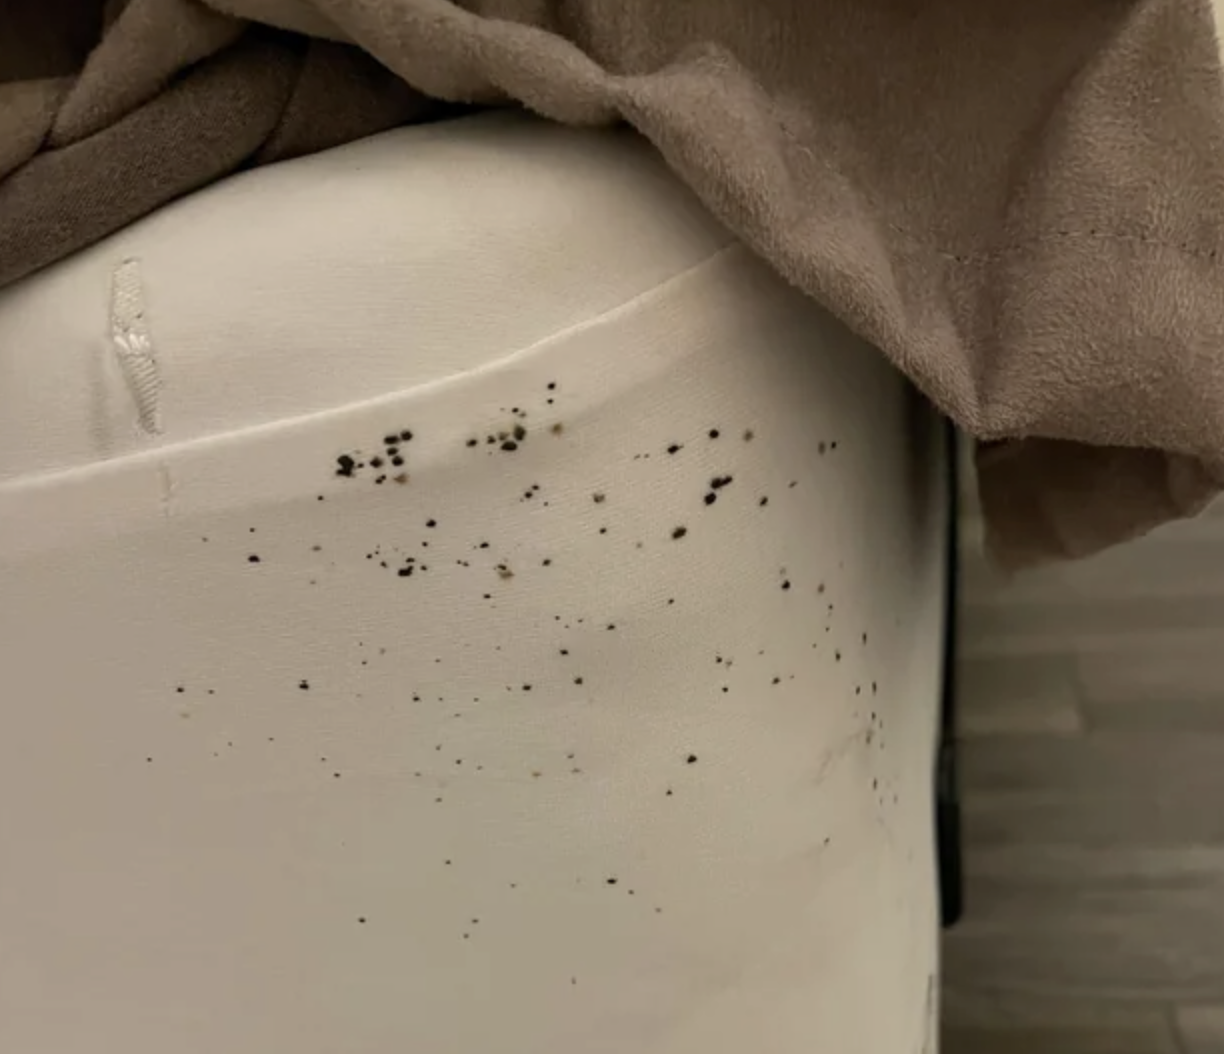 Here's How To Properly Check Hotels And Airbnbs For Bedbugs